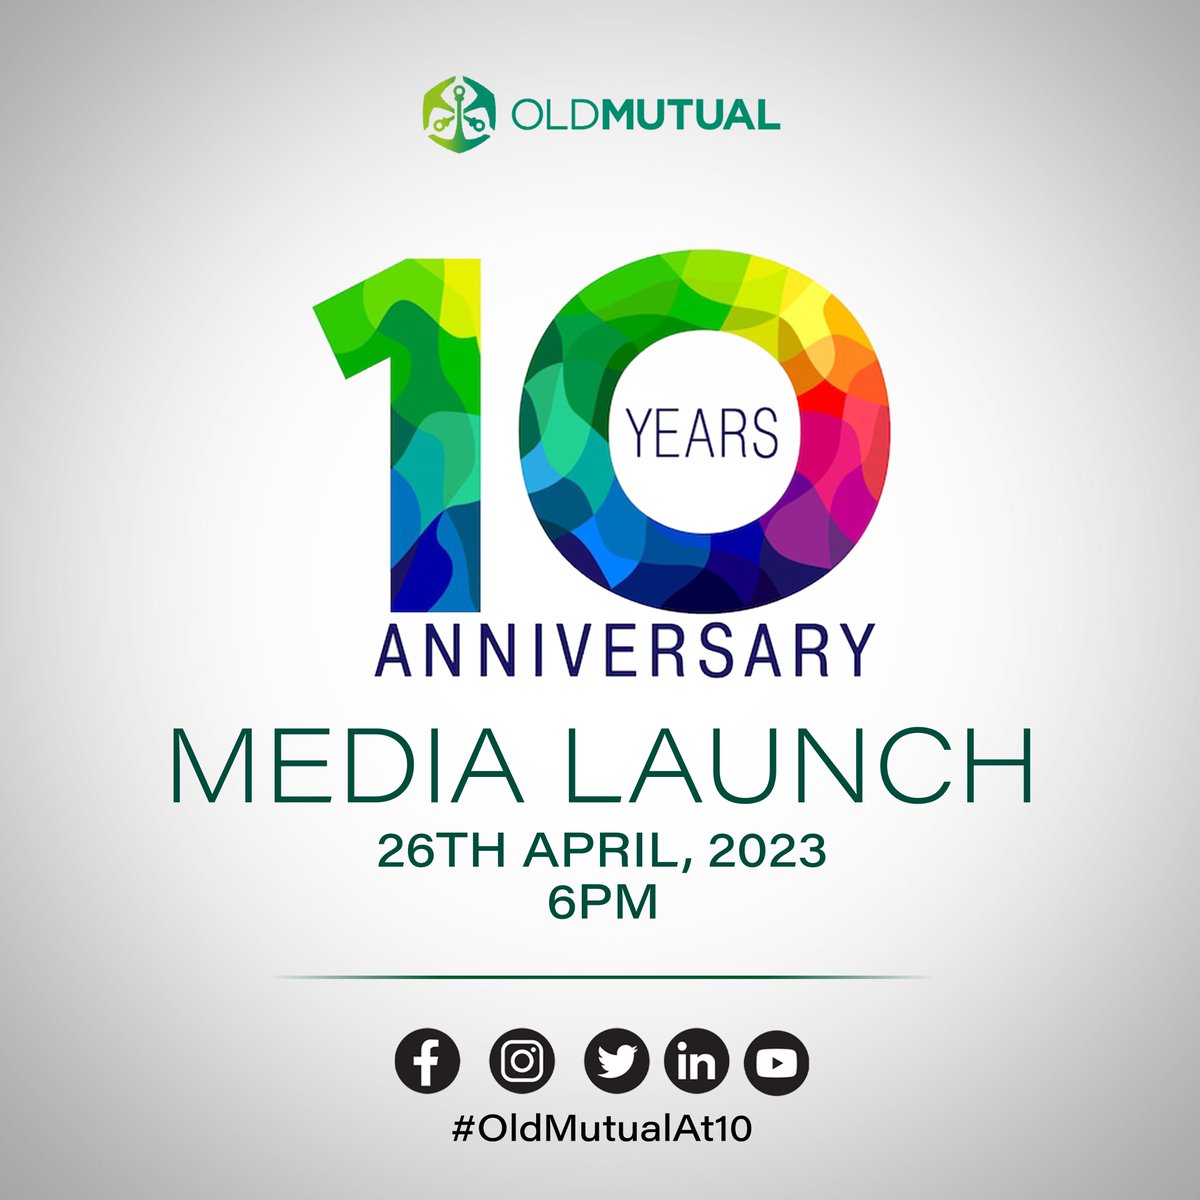 Join us as we celebrate a decade of impact and growth!
#OldMutualGhana